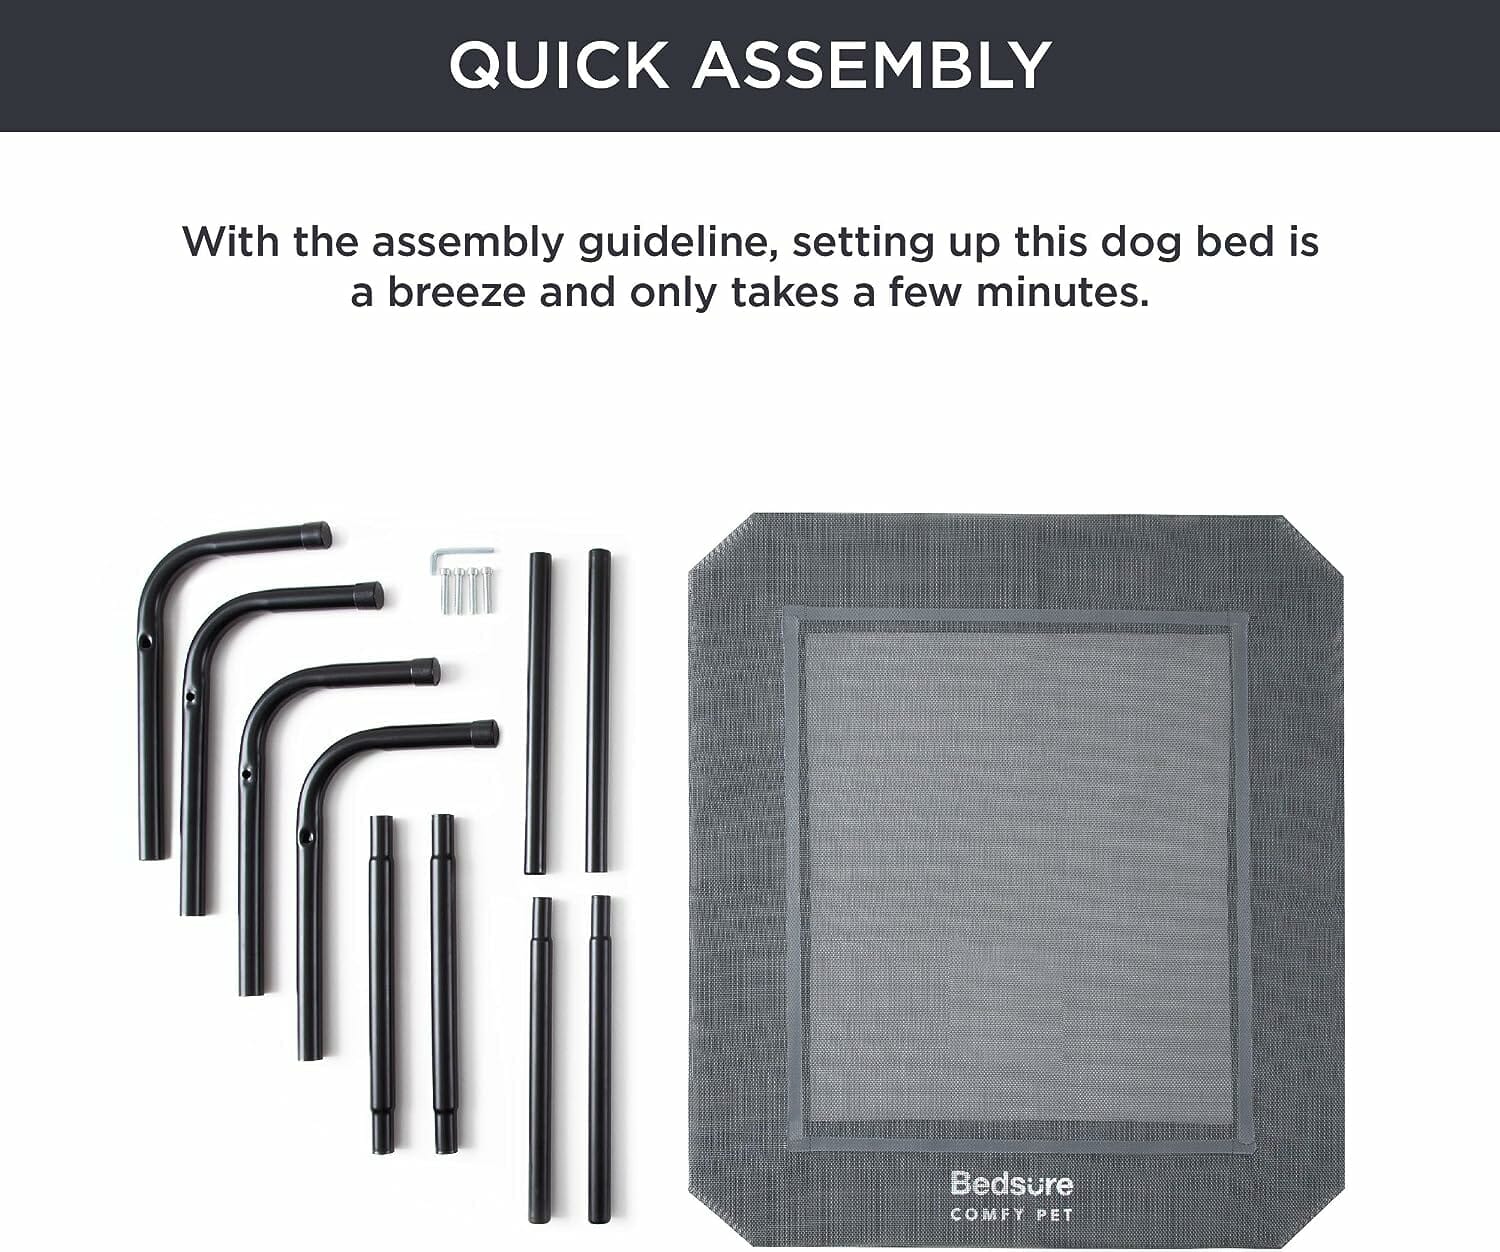 Bedsure Large Elevated Cooling Outdoor Dog Bed Review? Is It Worth It?